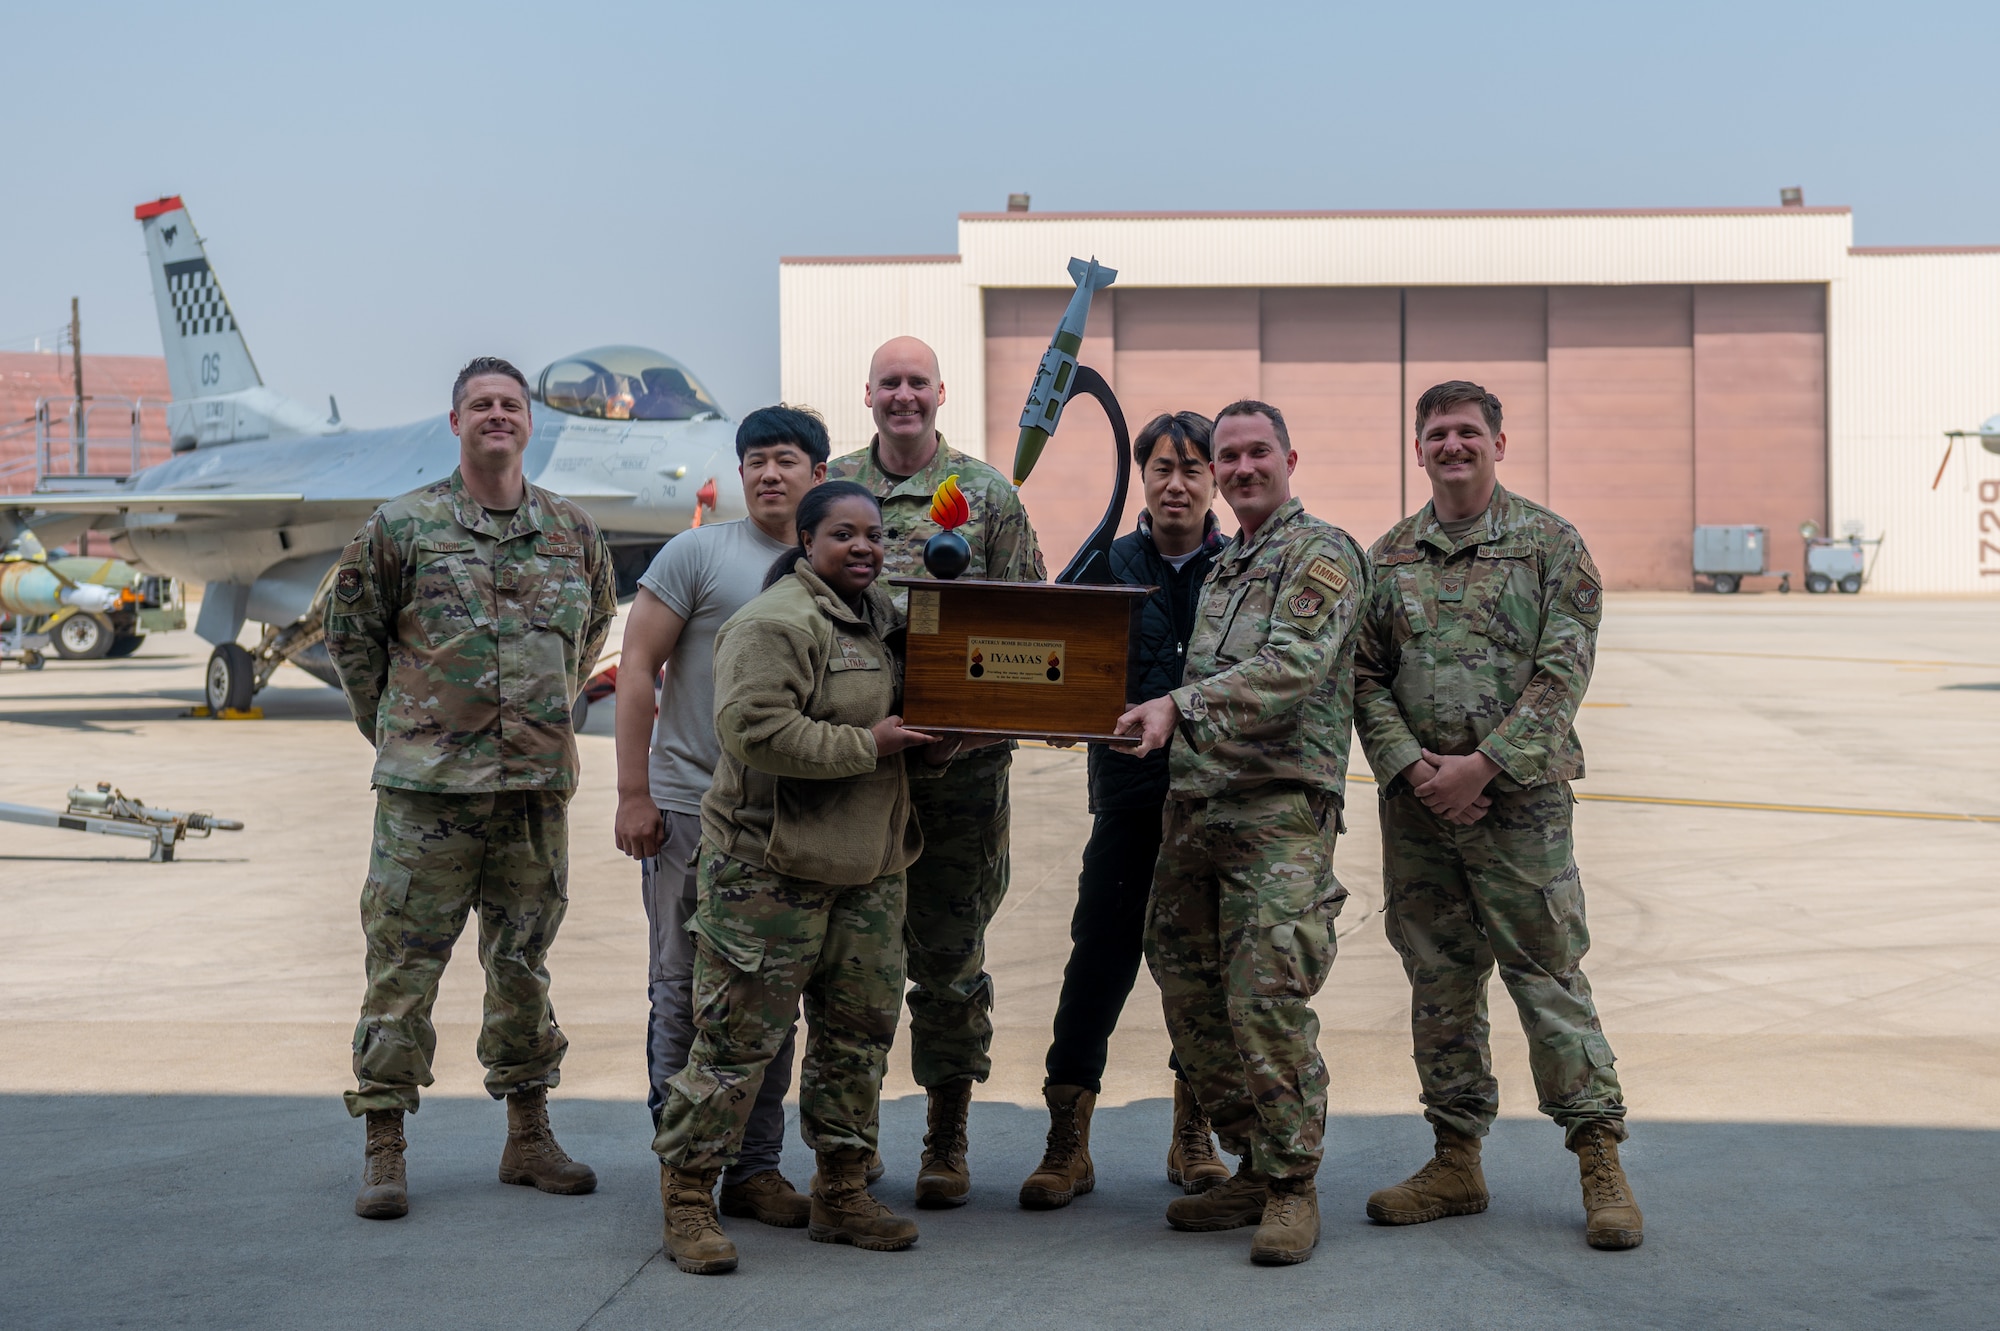 The 36th Fighter Generation Squadron competitors pose with their trophy from the weapons load crew of the quarter competition at Osan Air Base, Republic of Korea, on Mar. 31, 2023.